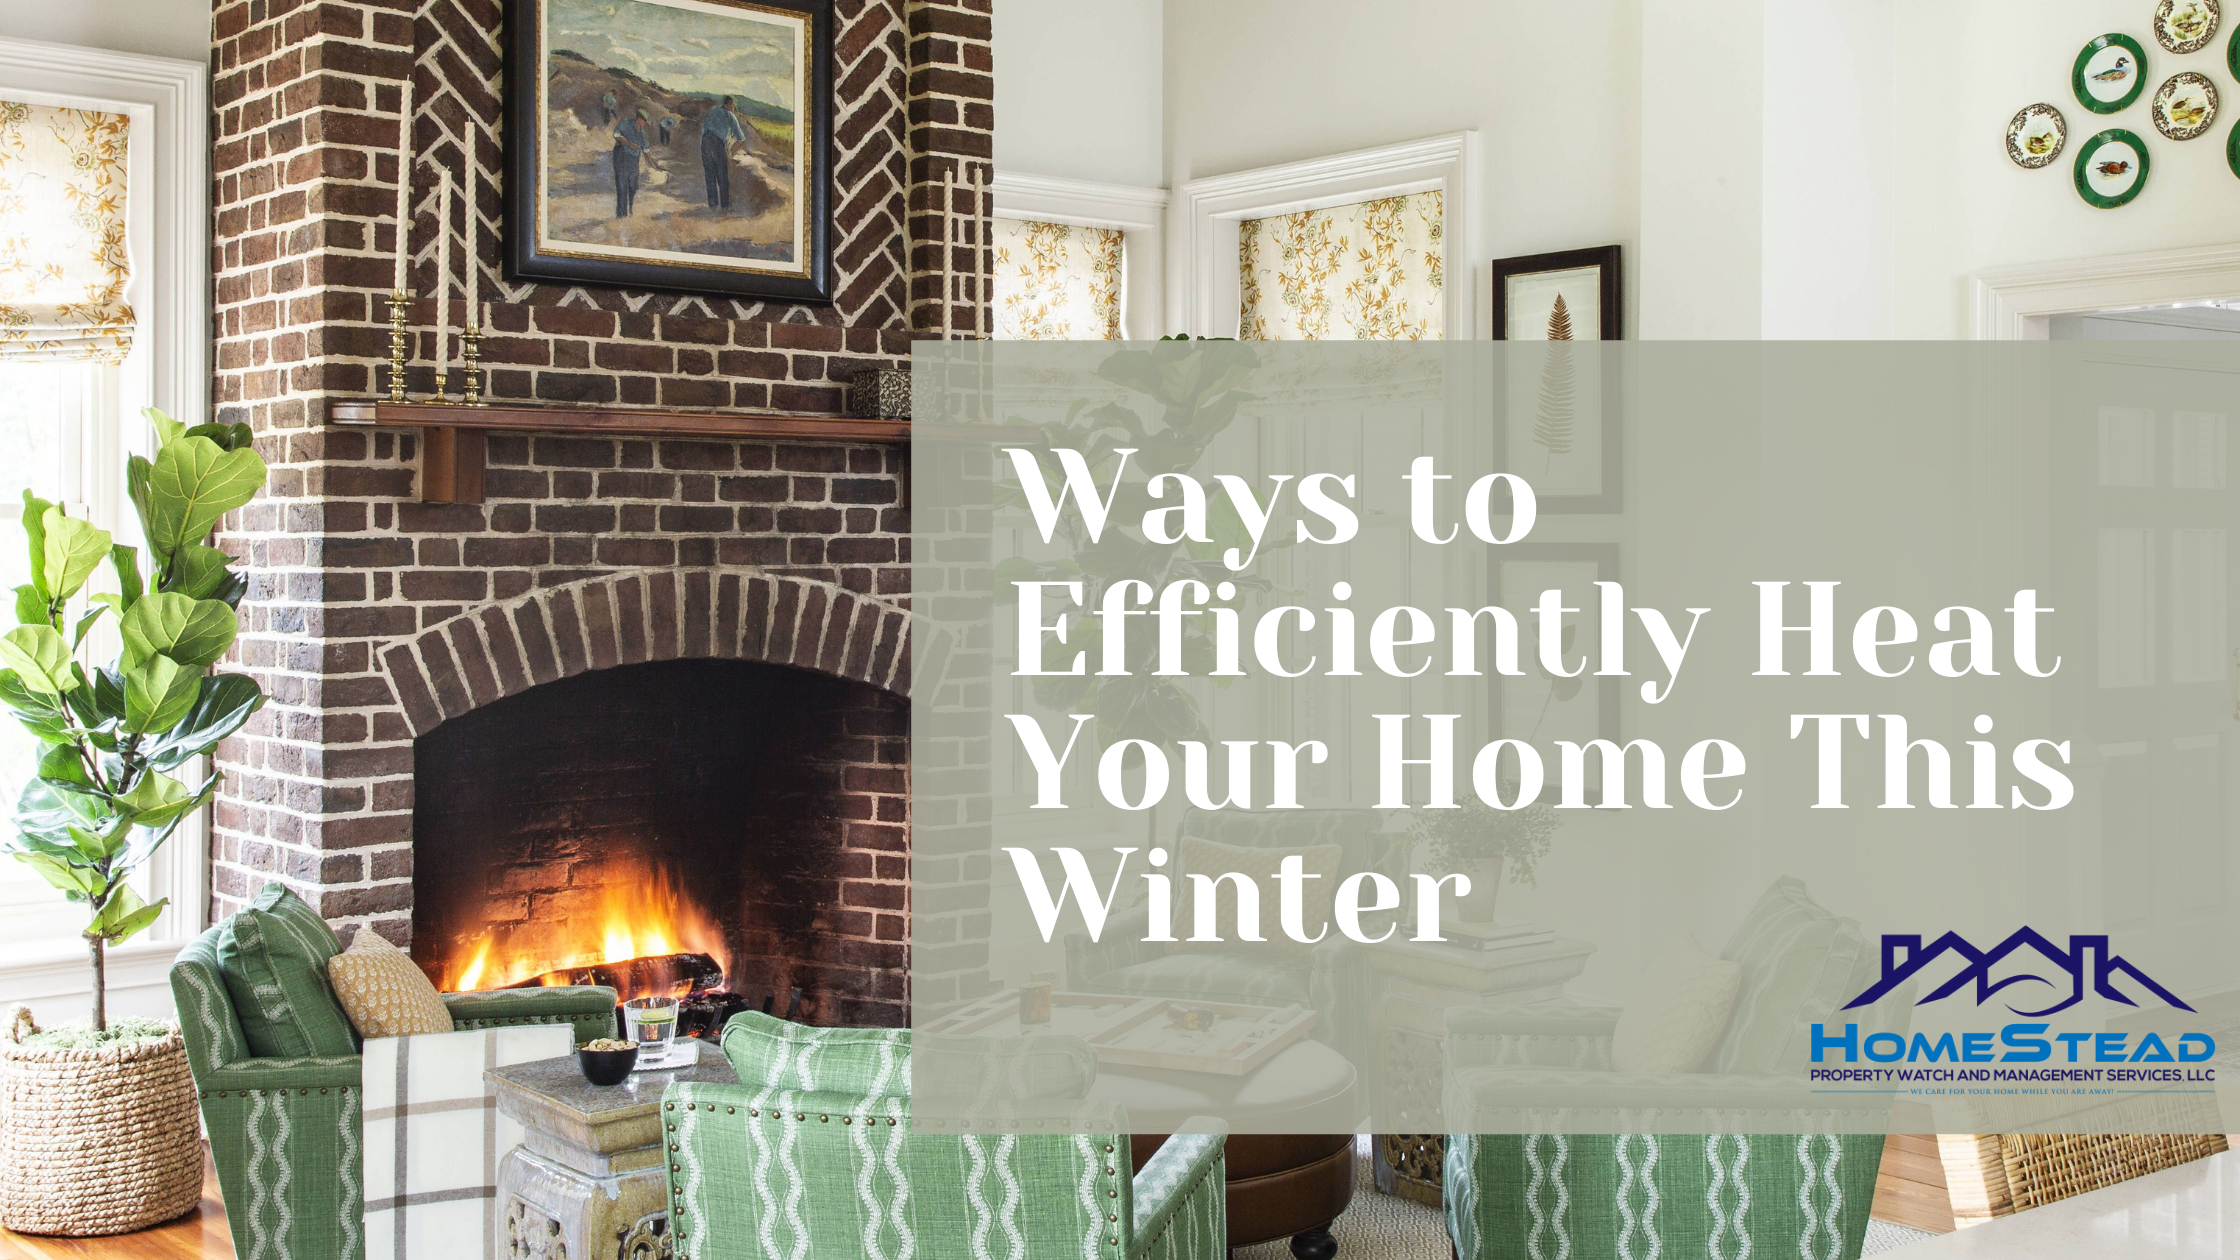 Ways to Efficiently Heat Your Home This Winter